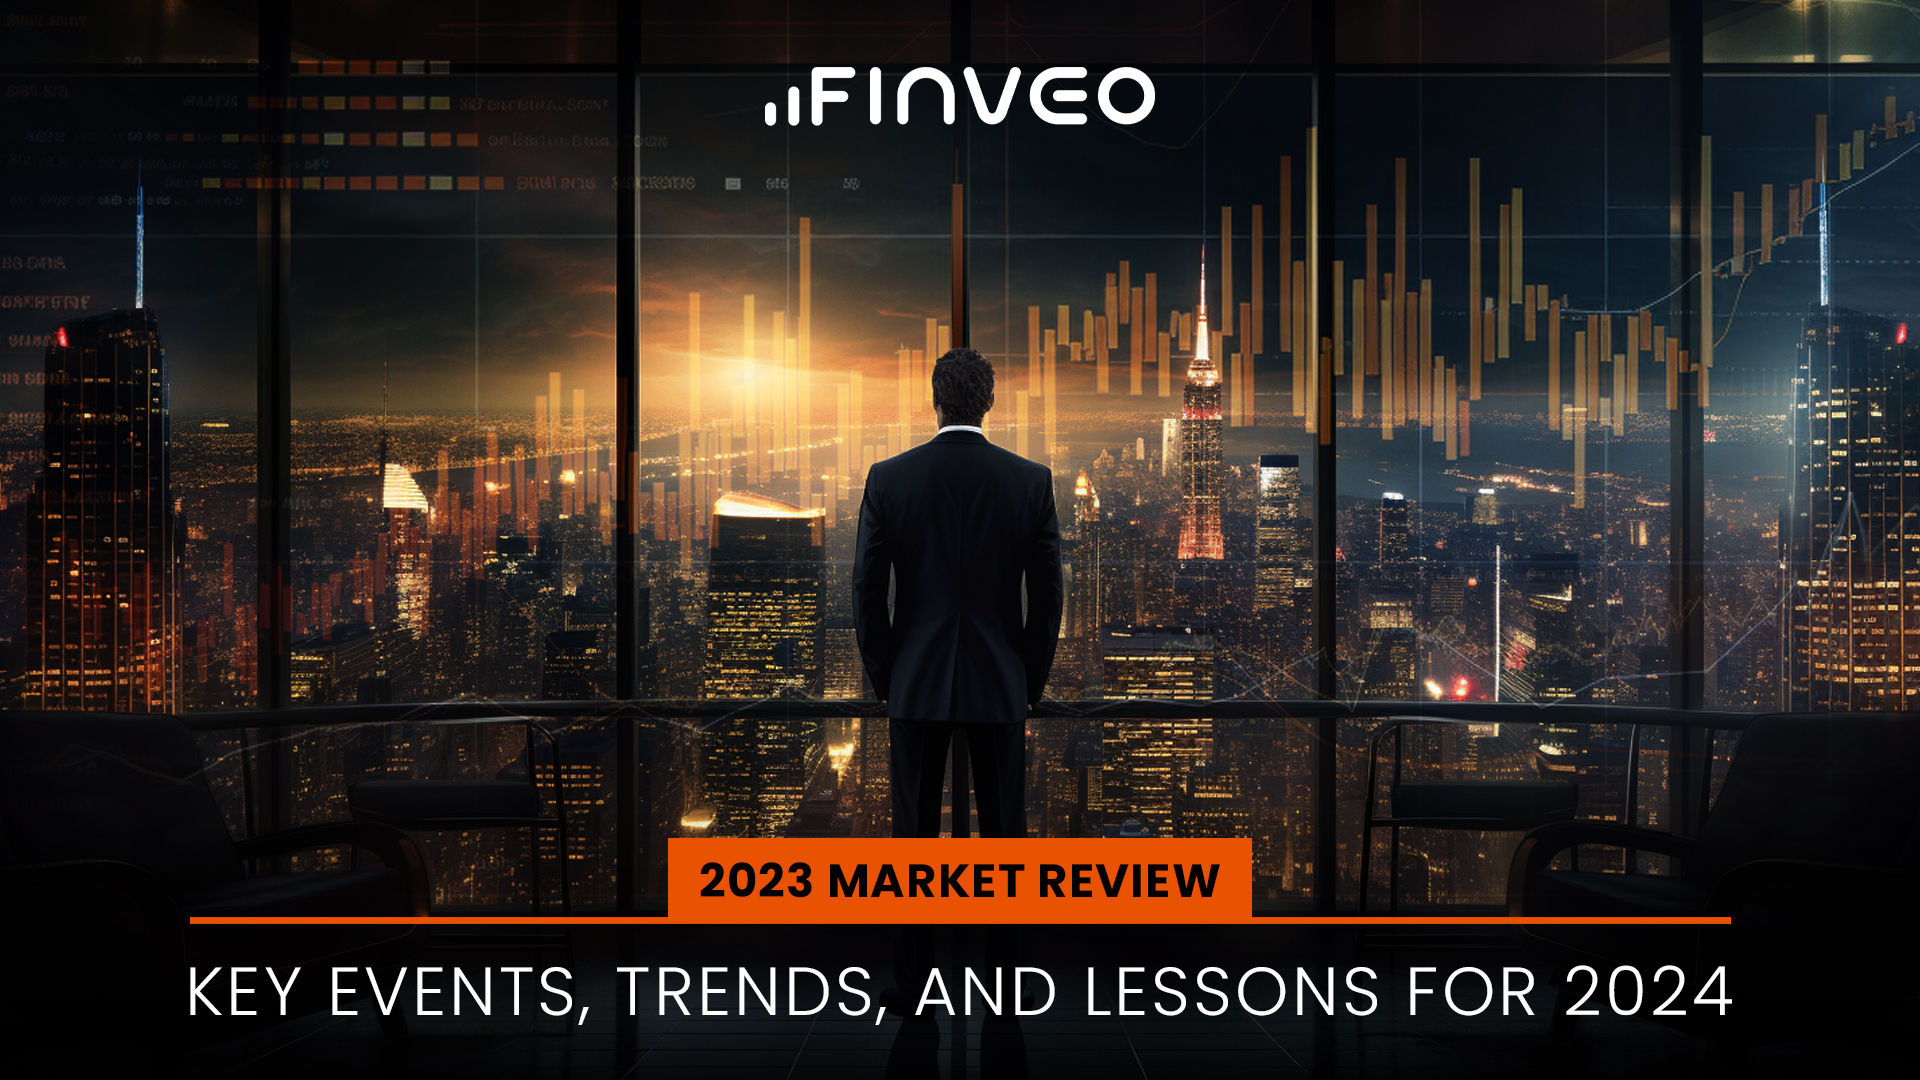 2023 Market Review: Key Events, Trends, and Lessons for 2024